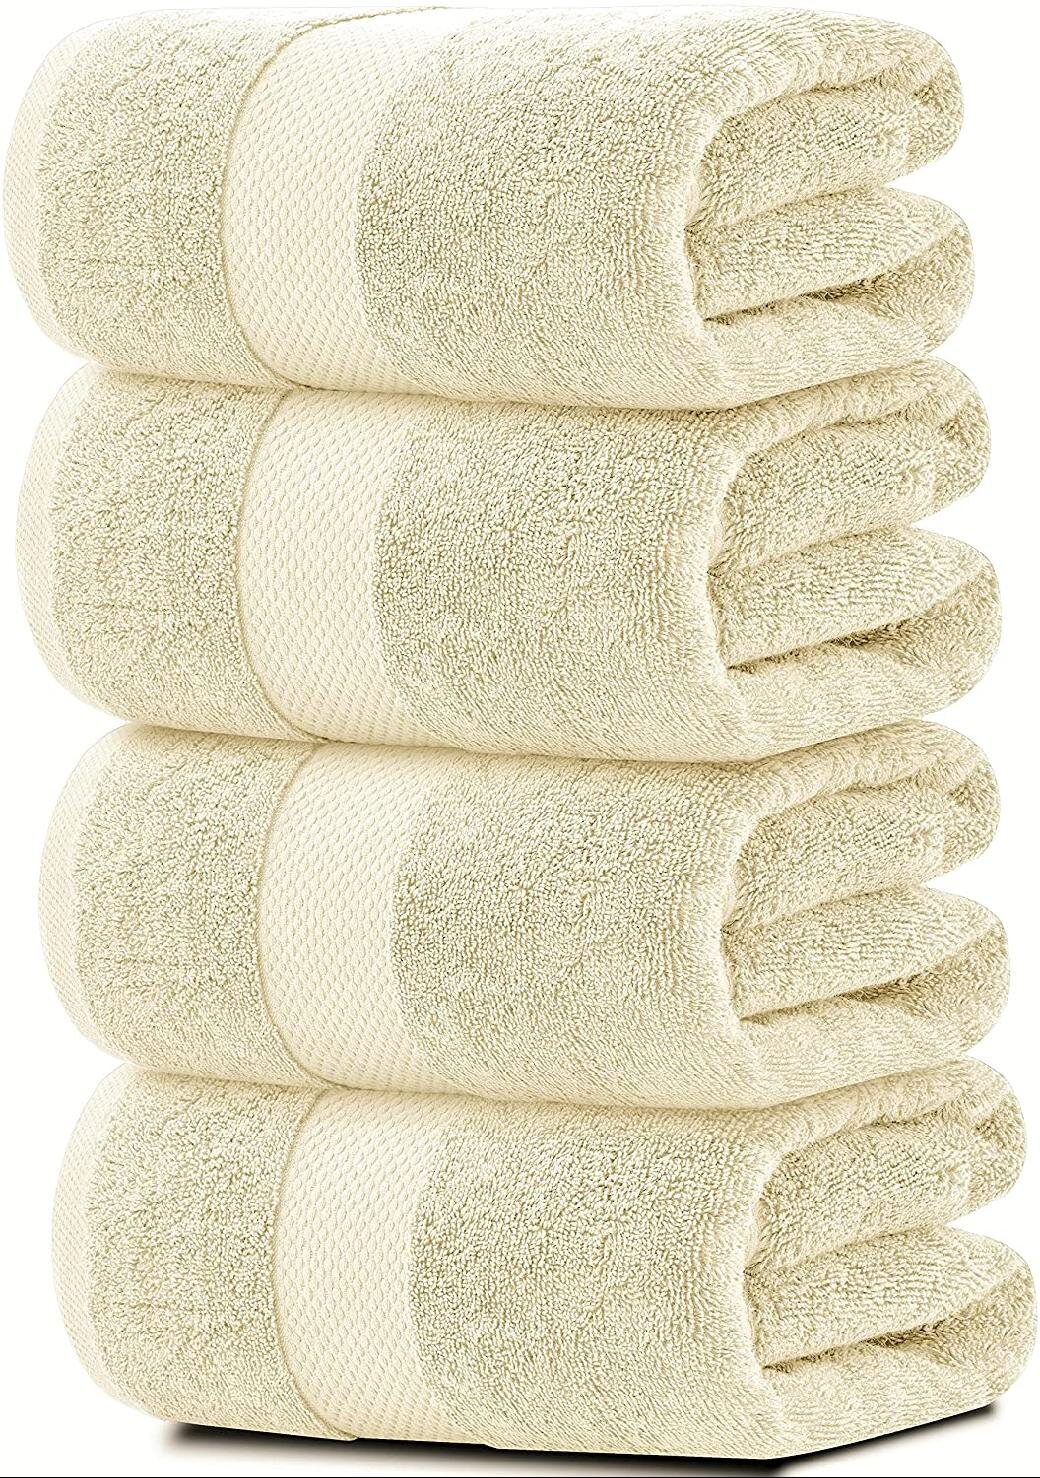 Stone-Washed 30 x 60 inch Soft Lightweight Travel Towel Pure 100% Linen Bath Towel Natural Flax Thin Towel for Bathroom Gym or Sauna Waffle Weave Quick Dry Beach Towel Sustainable Bath Sheet